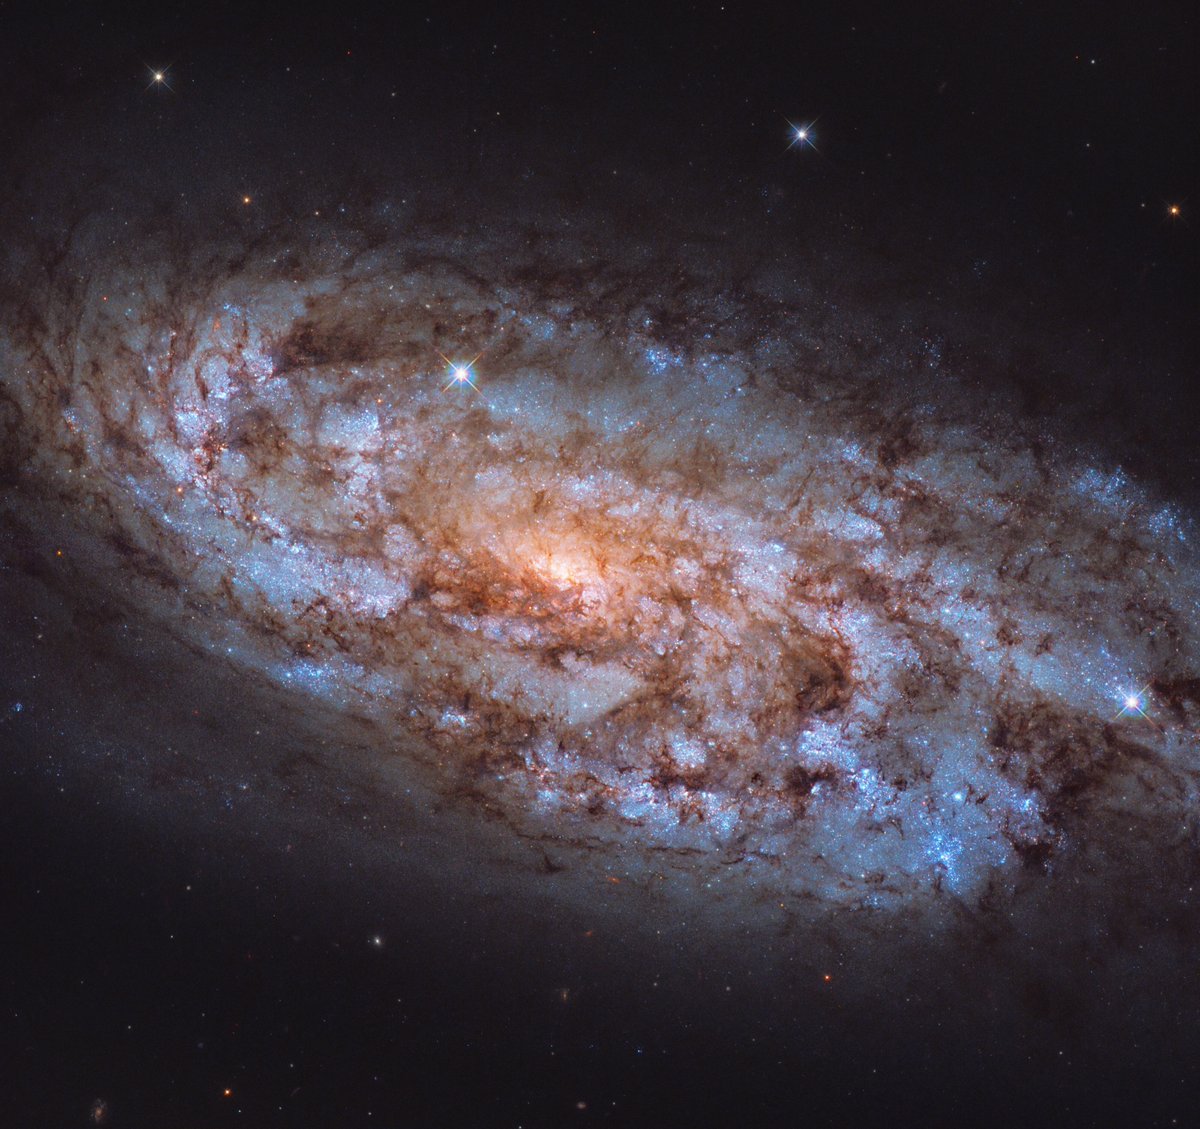 The spiral galaxy NGC 1792, about 36 million light years away in the constellation Columba, is in a period of "starburst" where stars are forming at a rapid rate.Credit: ESA/Hubble & NASA, J. LeeAcknowledgement: Leo Shatz